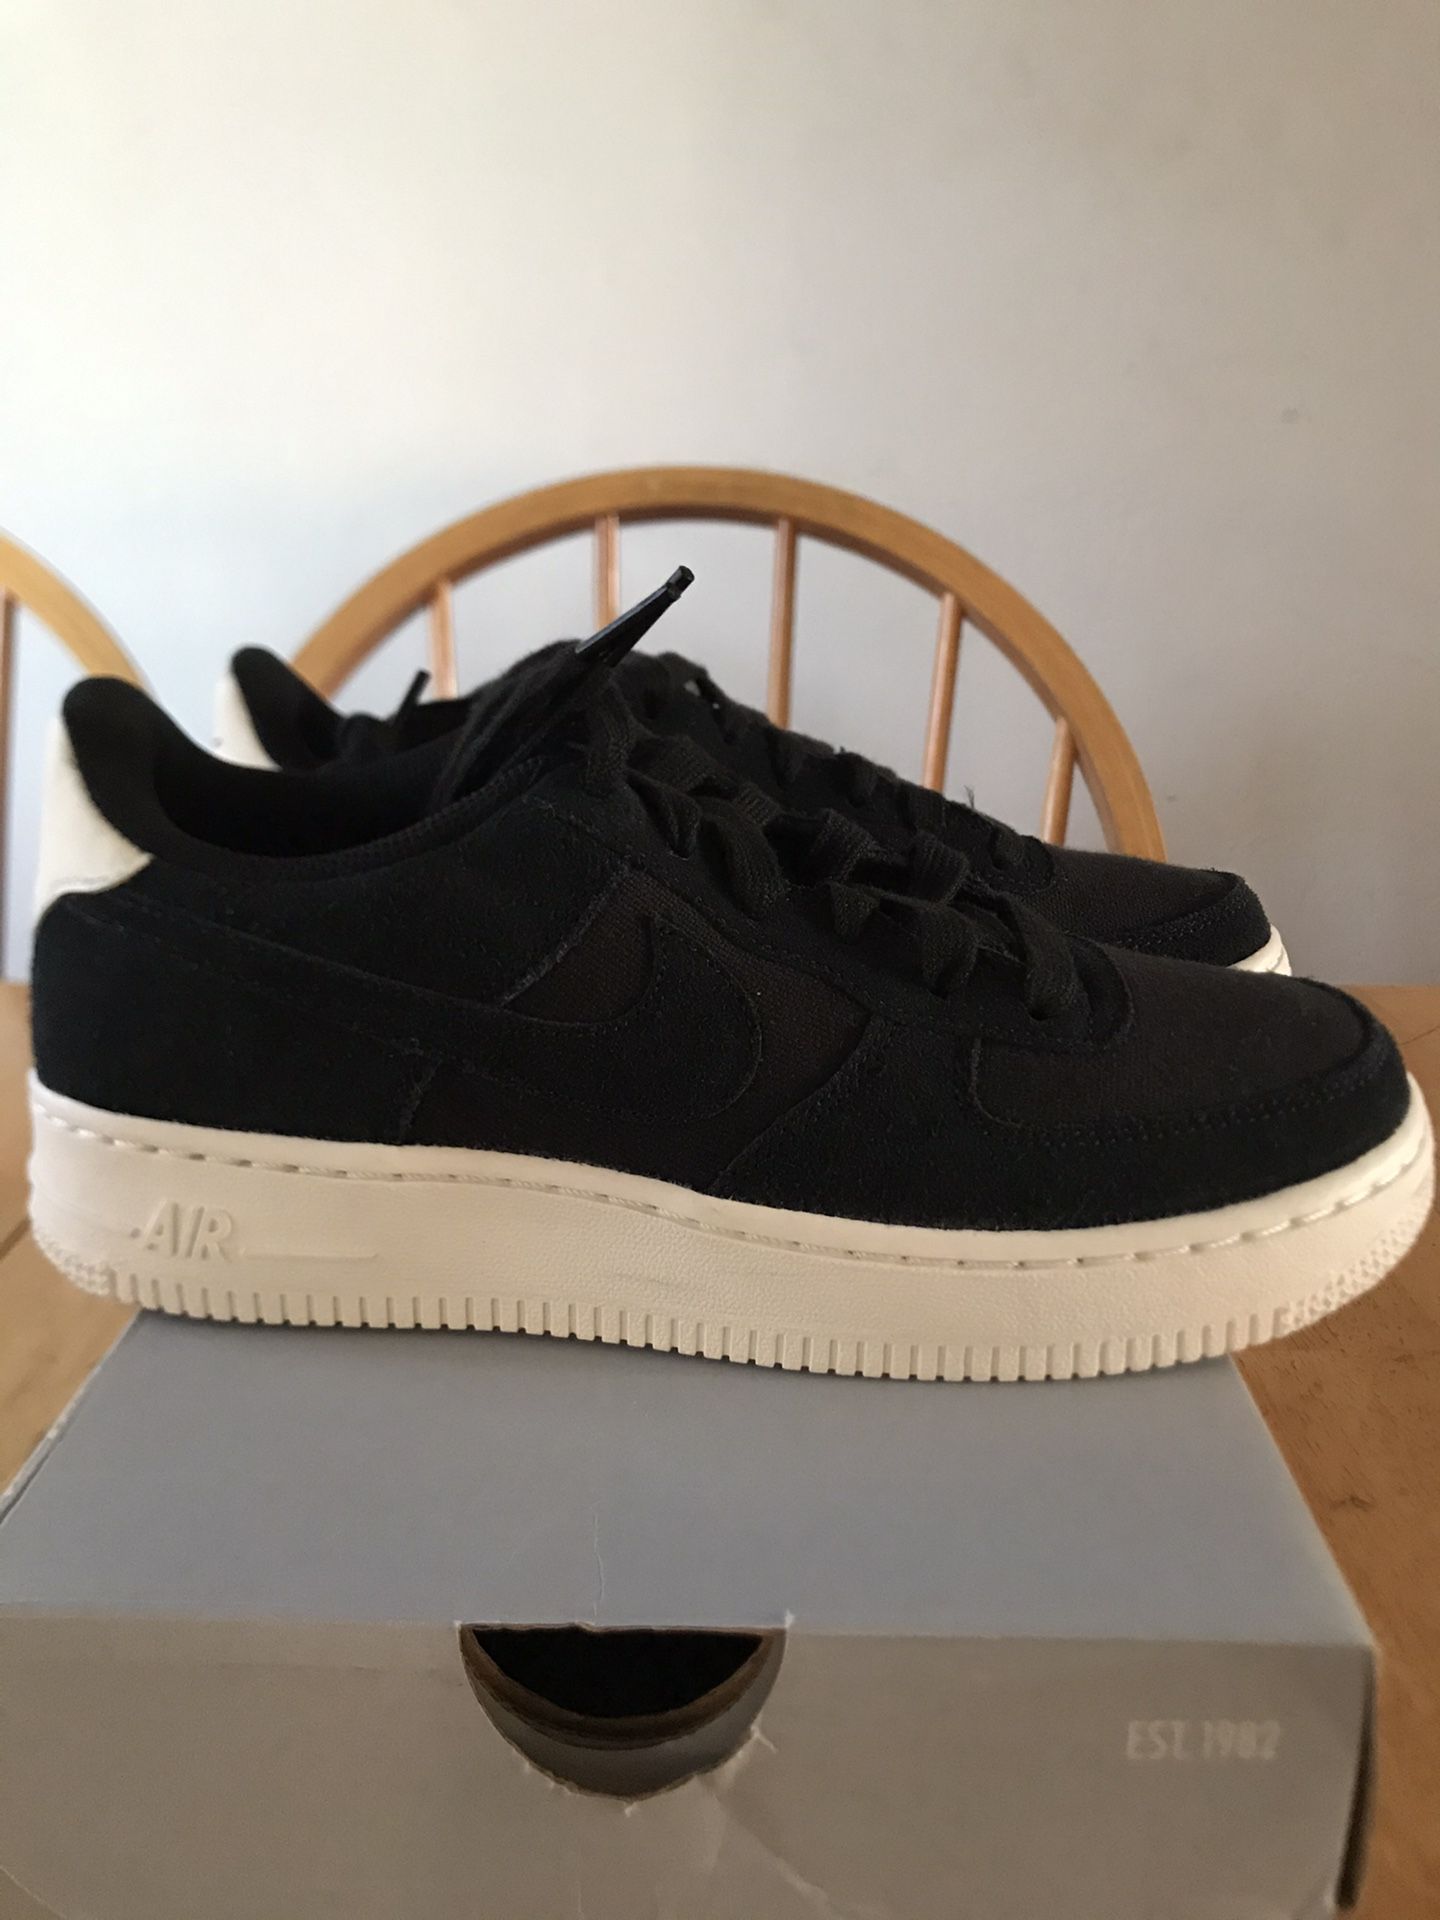 Brand new Nike Air Force One suede black shoes (youth 5y, women’s 6.5)